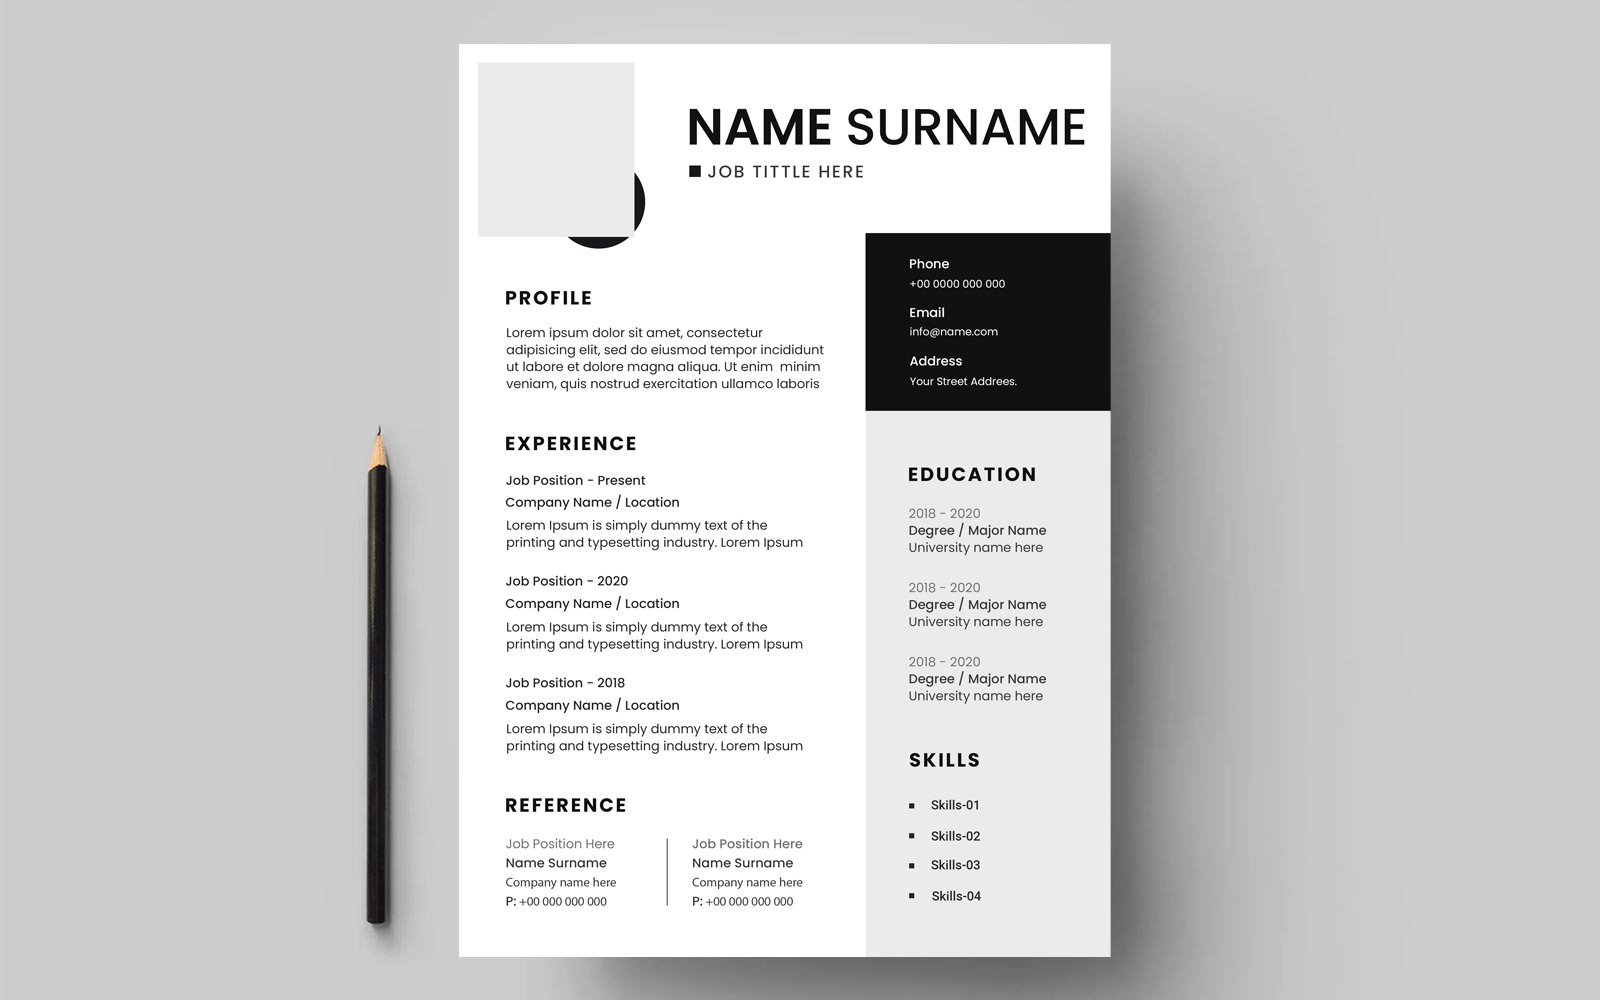 Template #395262 Clean Corporate Webdesign Template - Logo template Preview